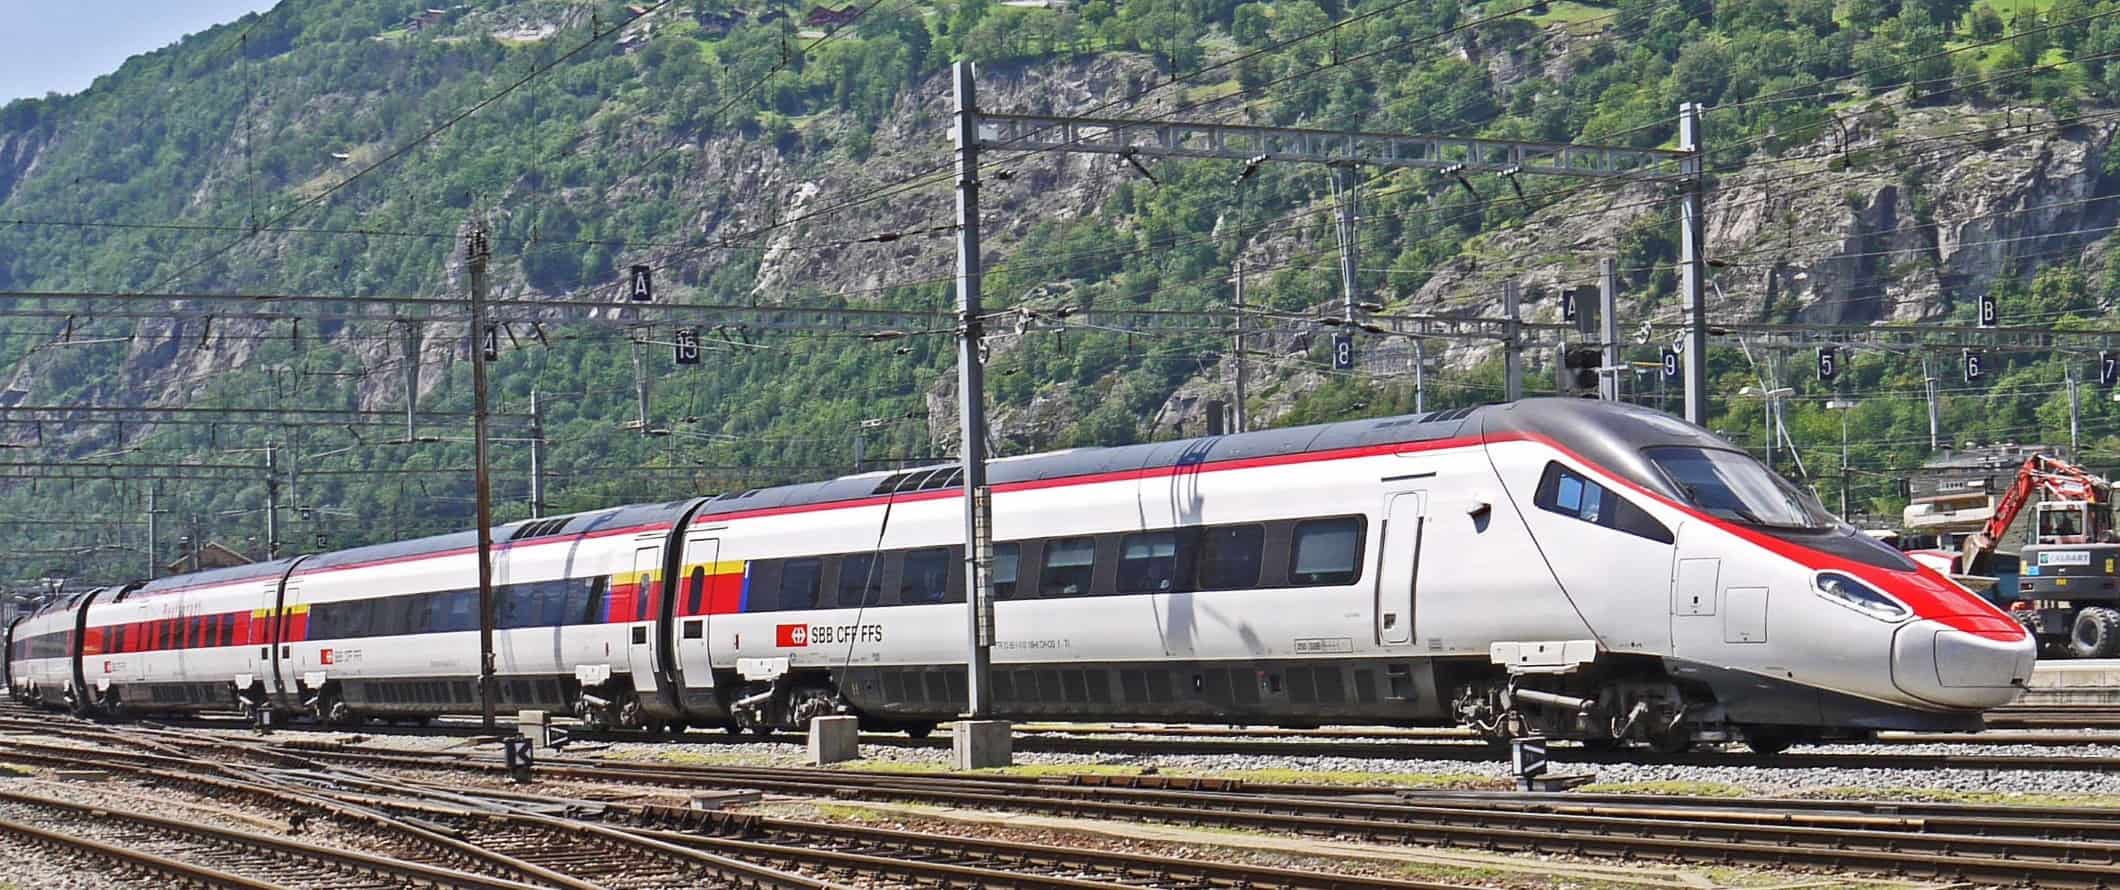 High speed train in Italy.